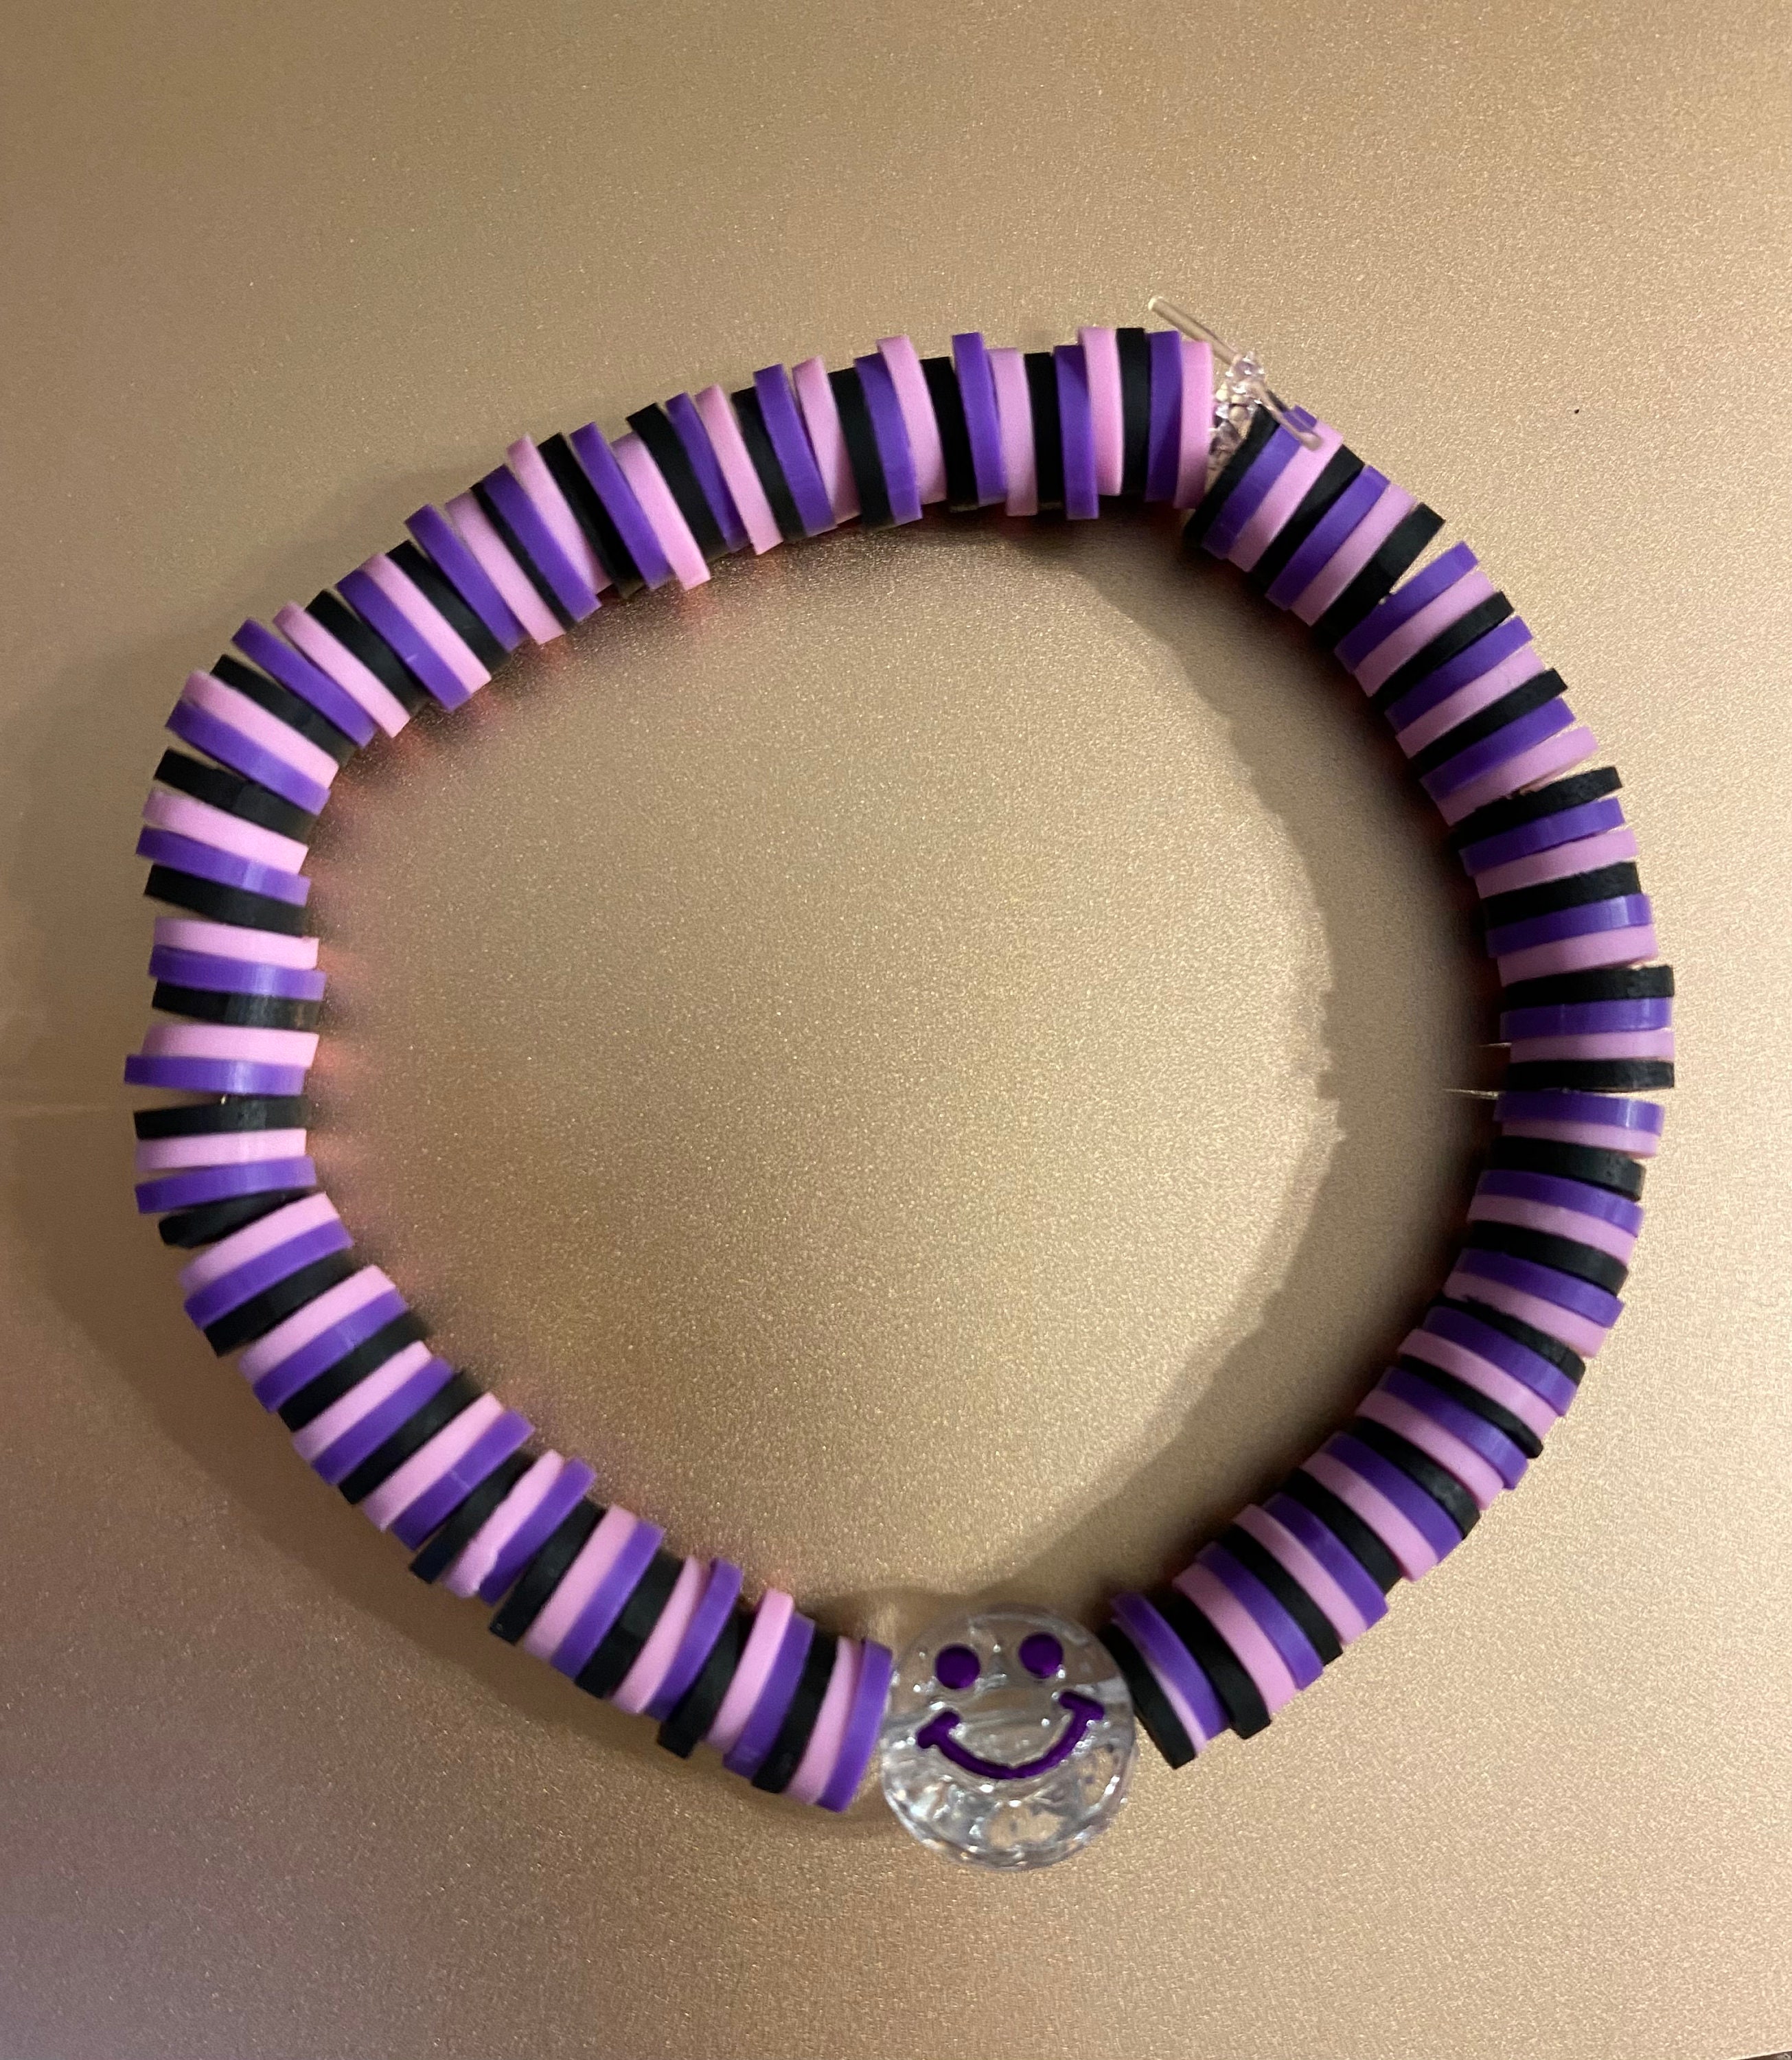 Purple Cats Eye Bracelet helps with Determination and Willpower